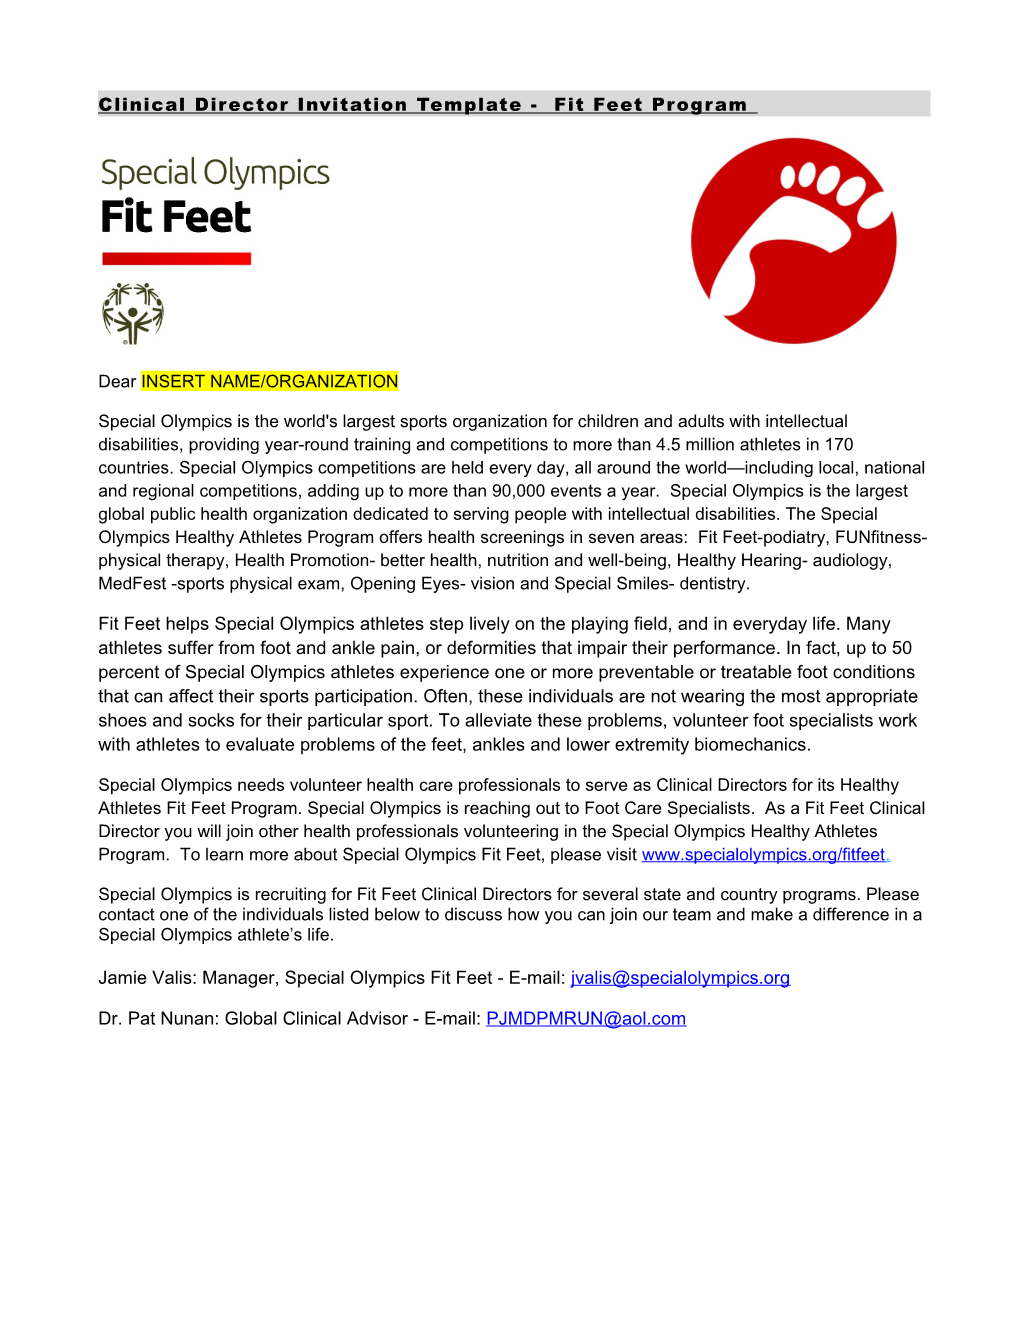 Clinical Director Invitation Template - Fit Feet Program